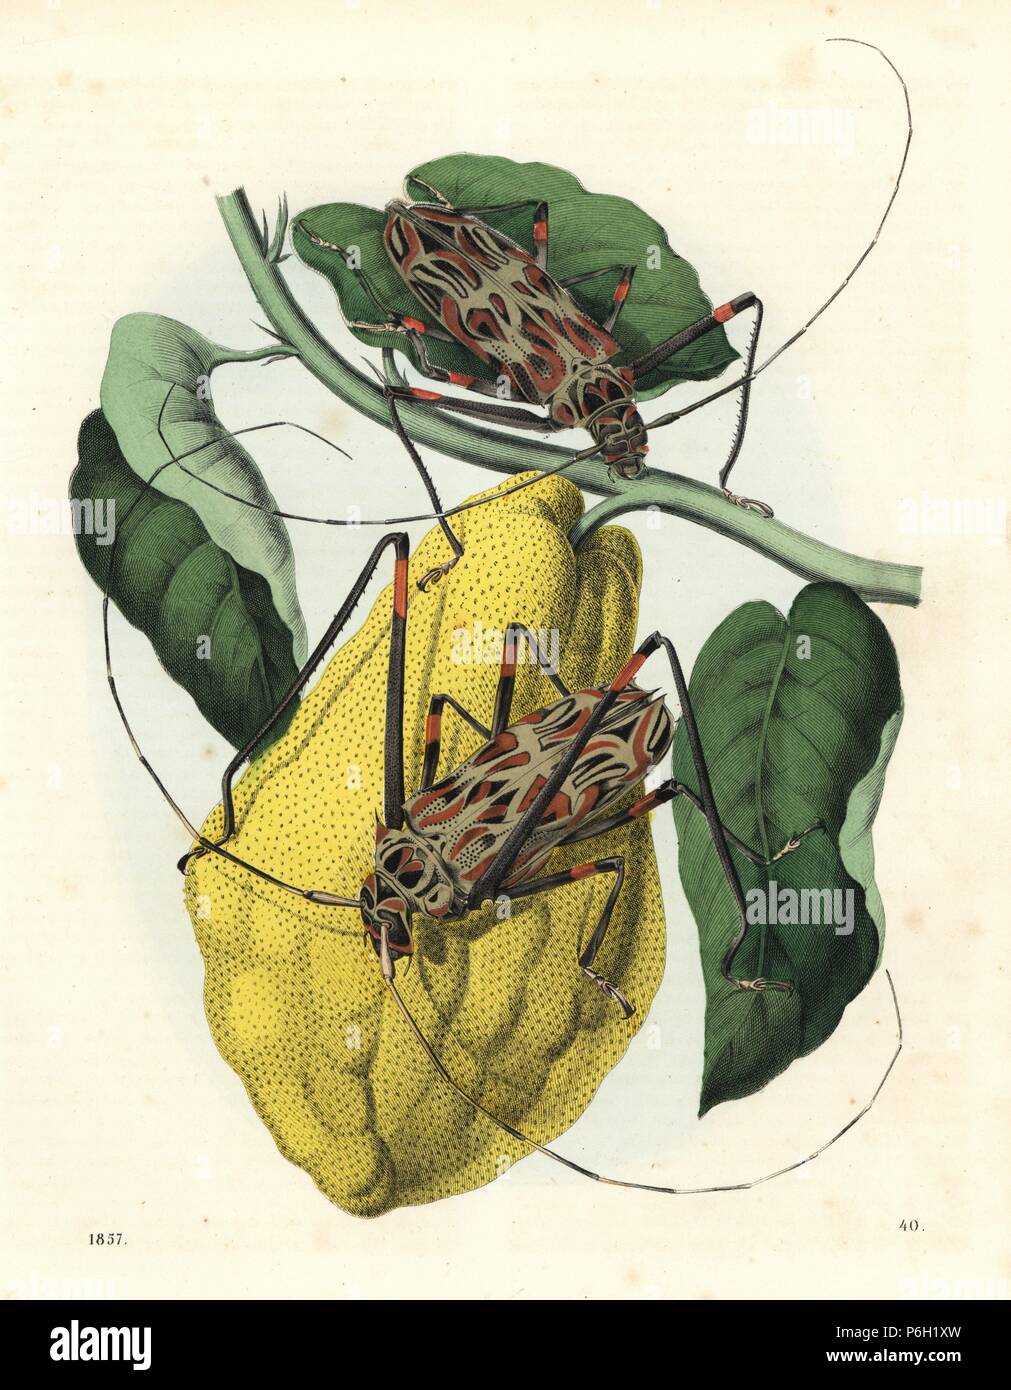 Harlequin beetle, Acrocinus longimanus, male and female, native to South America, on a cacao tree, Theobroma cacao. Handcoloured lithograph from Carl Hoffmann's Book of the World, Stuttgart, 1857. Stock Photo